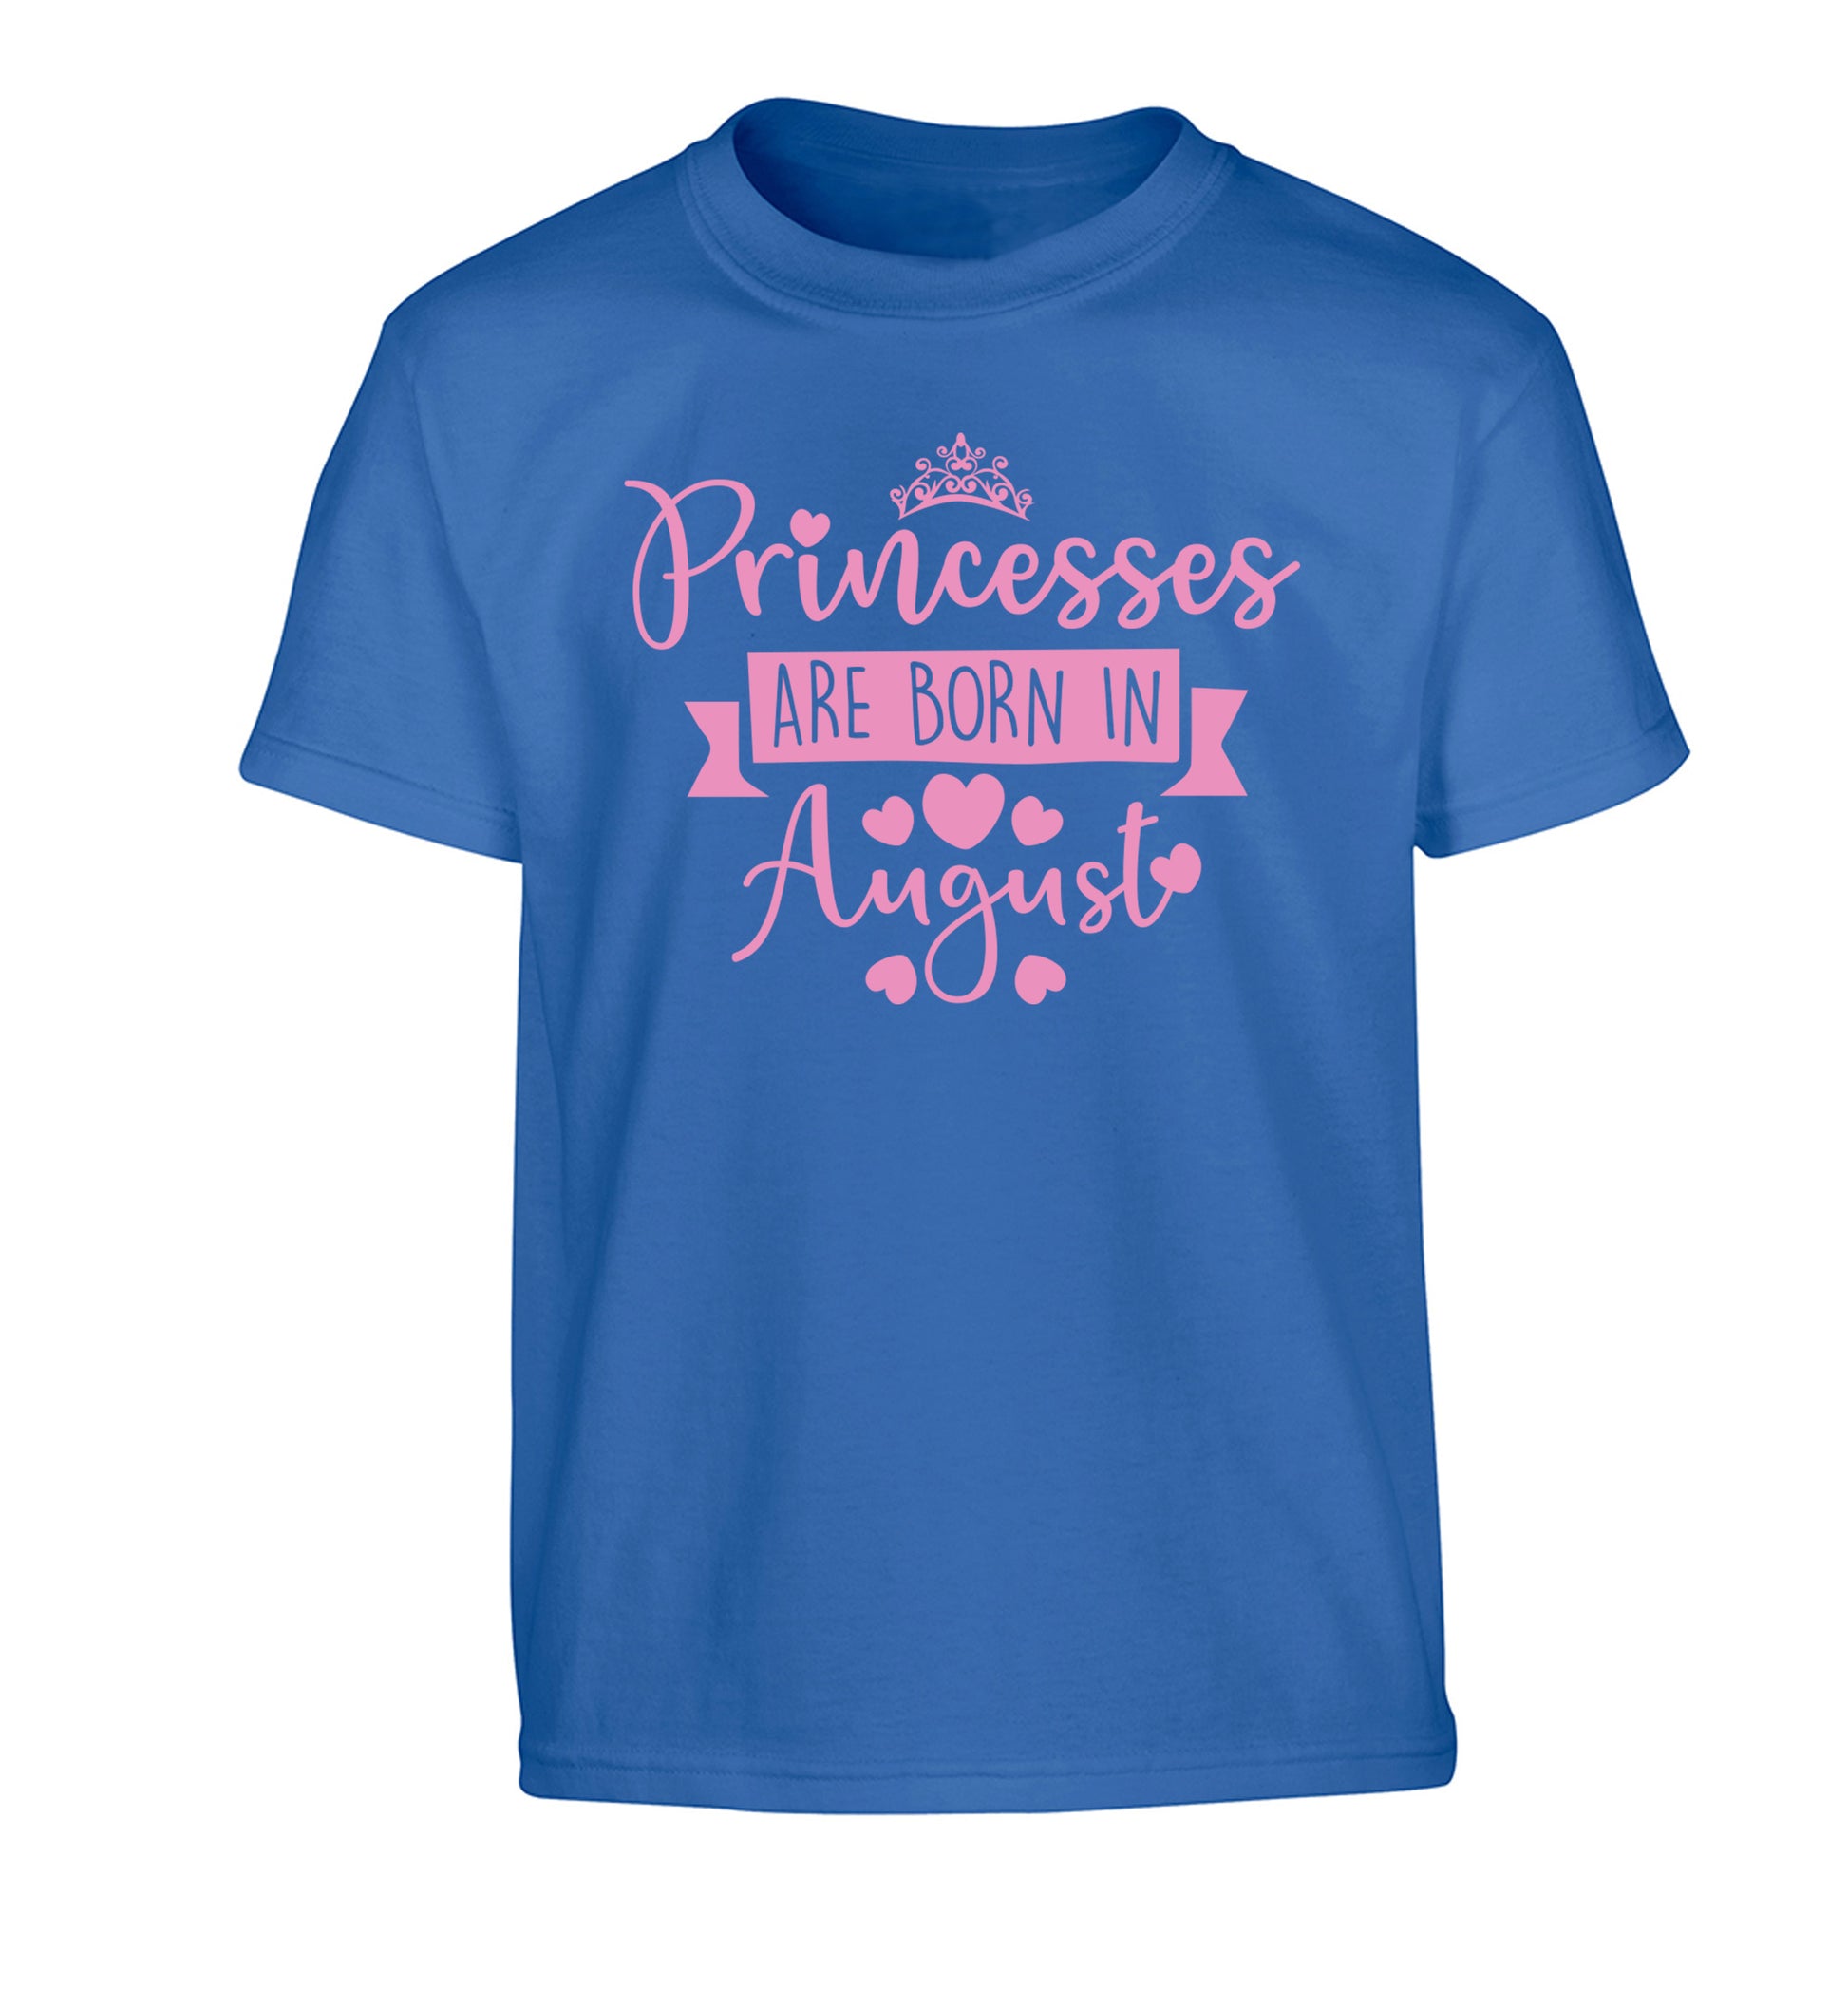 Princesses are born in August Children's blue Tshirt 12-13 Years